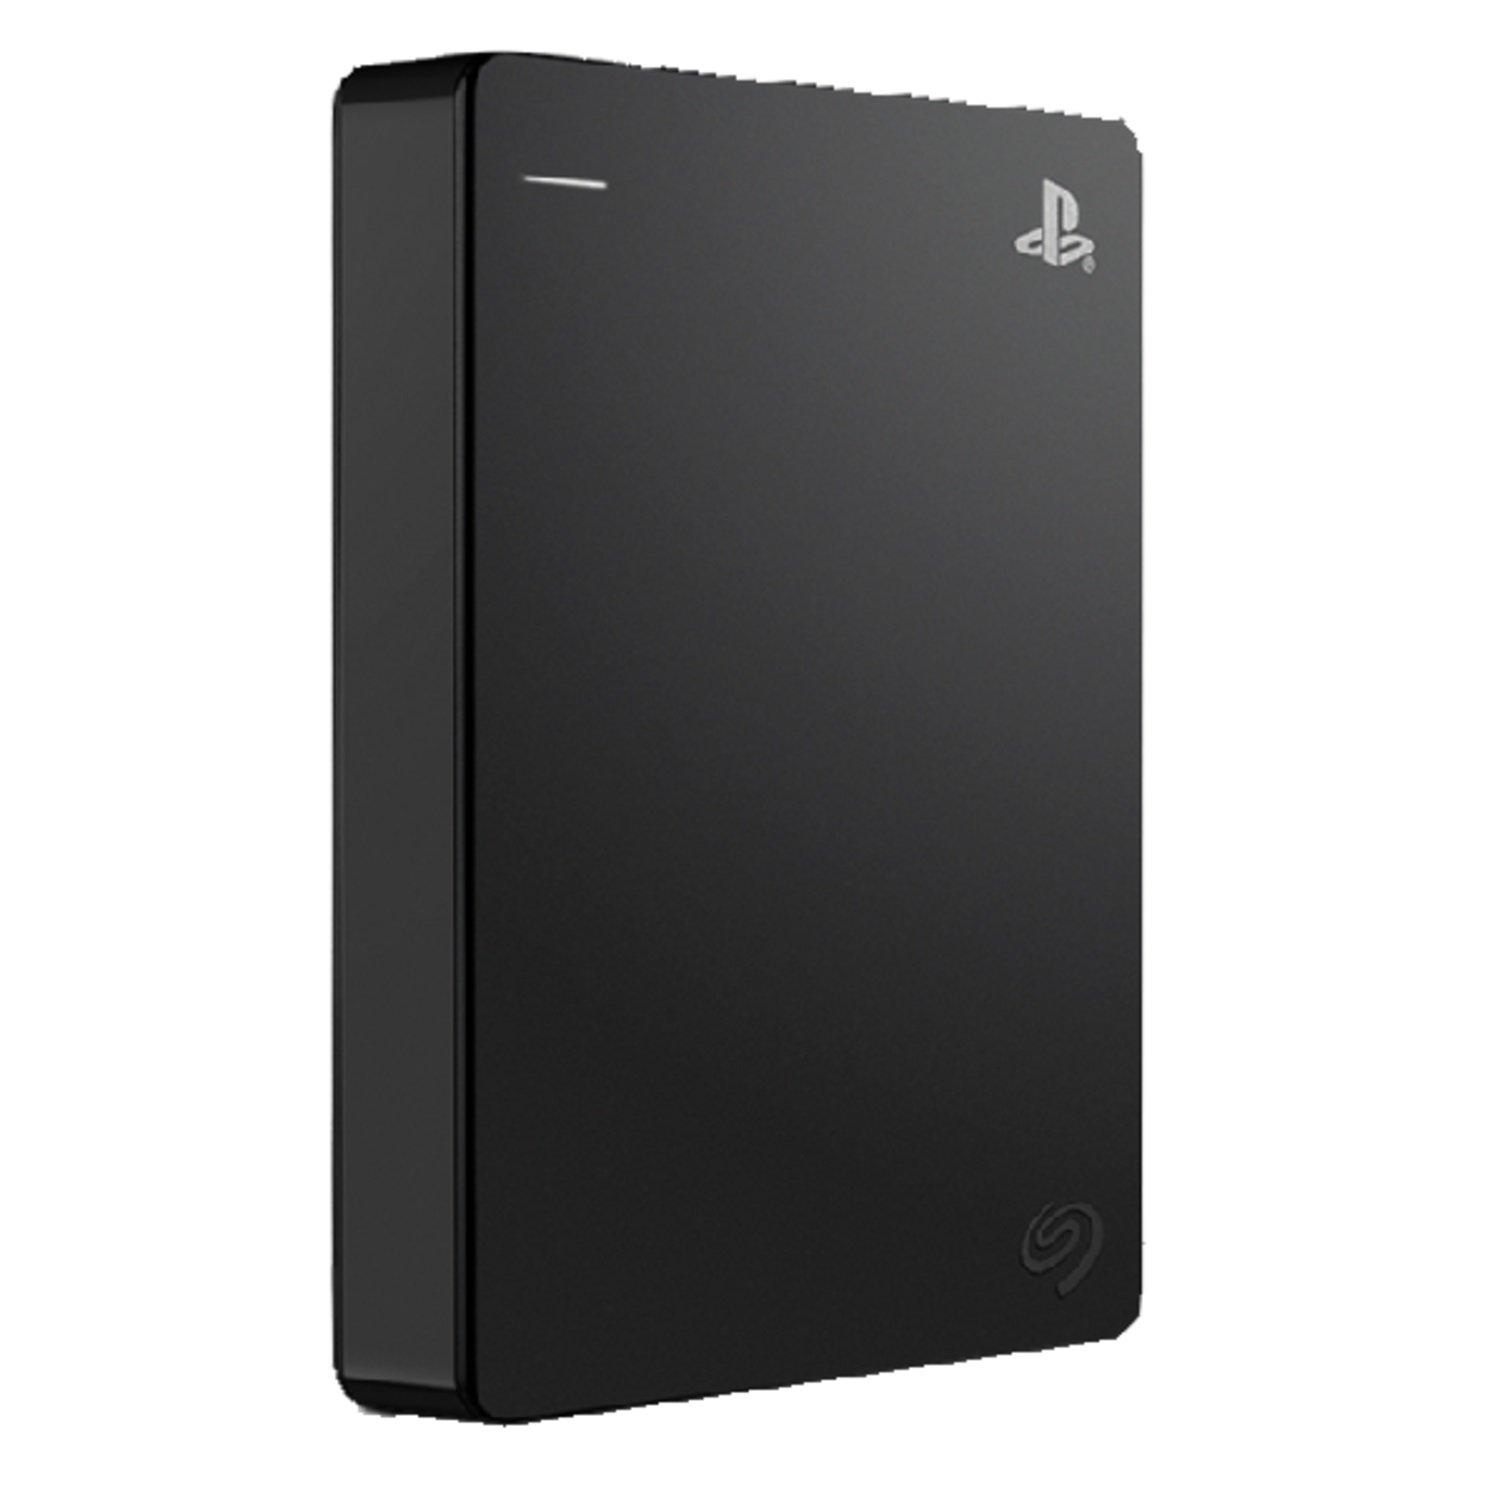 External Drive Game PlayStation GameStop 4TB Hard Seagate for Drive |